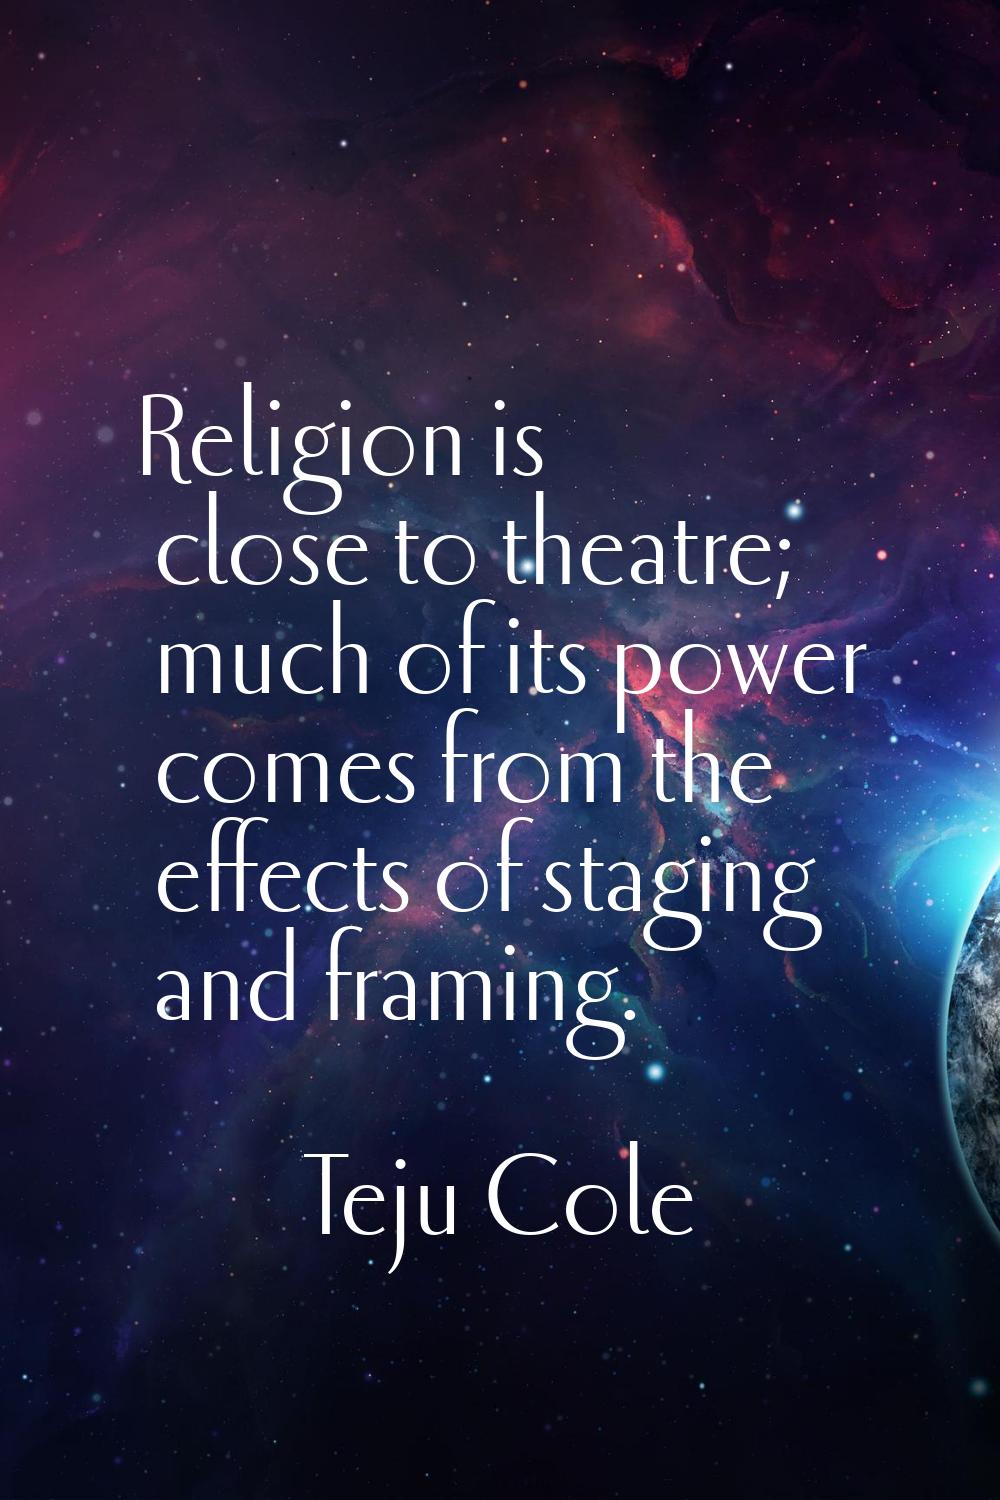 Religion is close to theatre; much of its power comes from the effects of staging and framing.